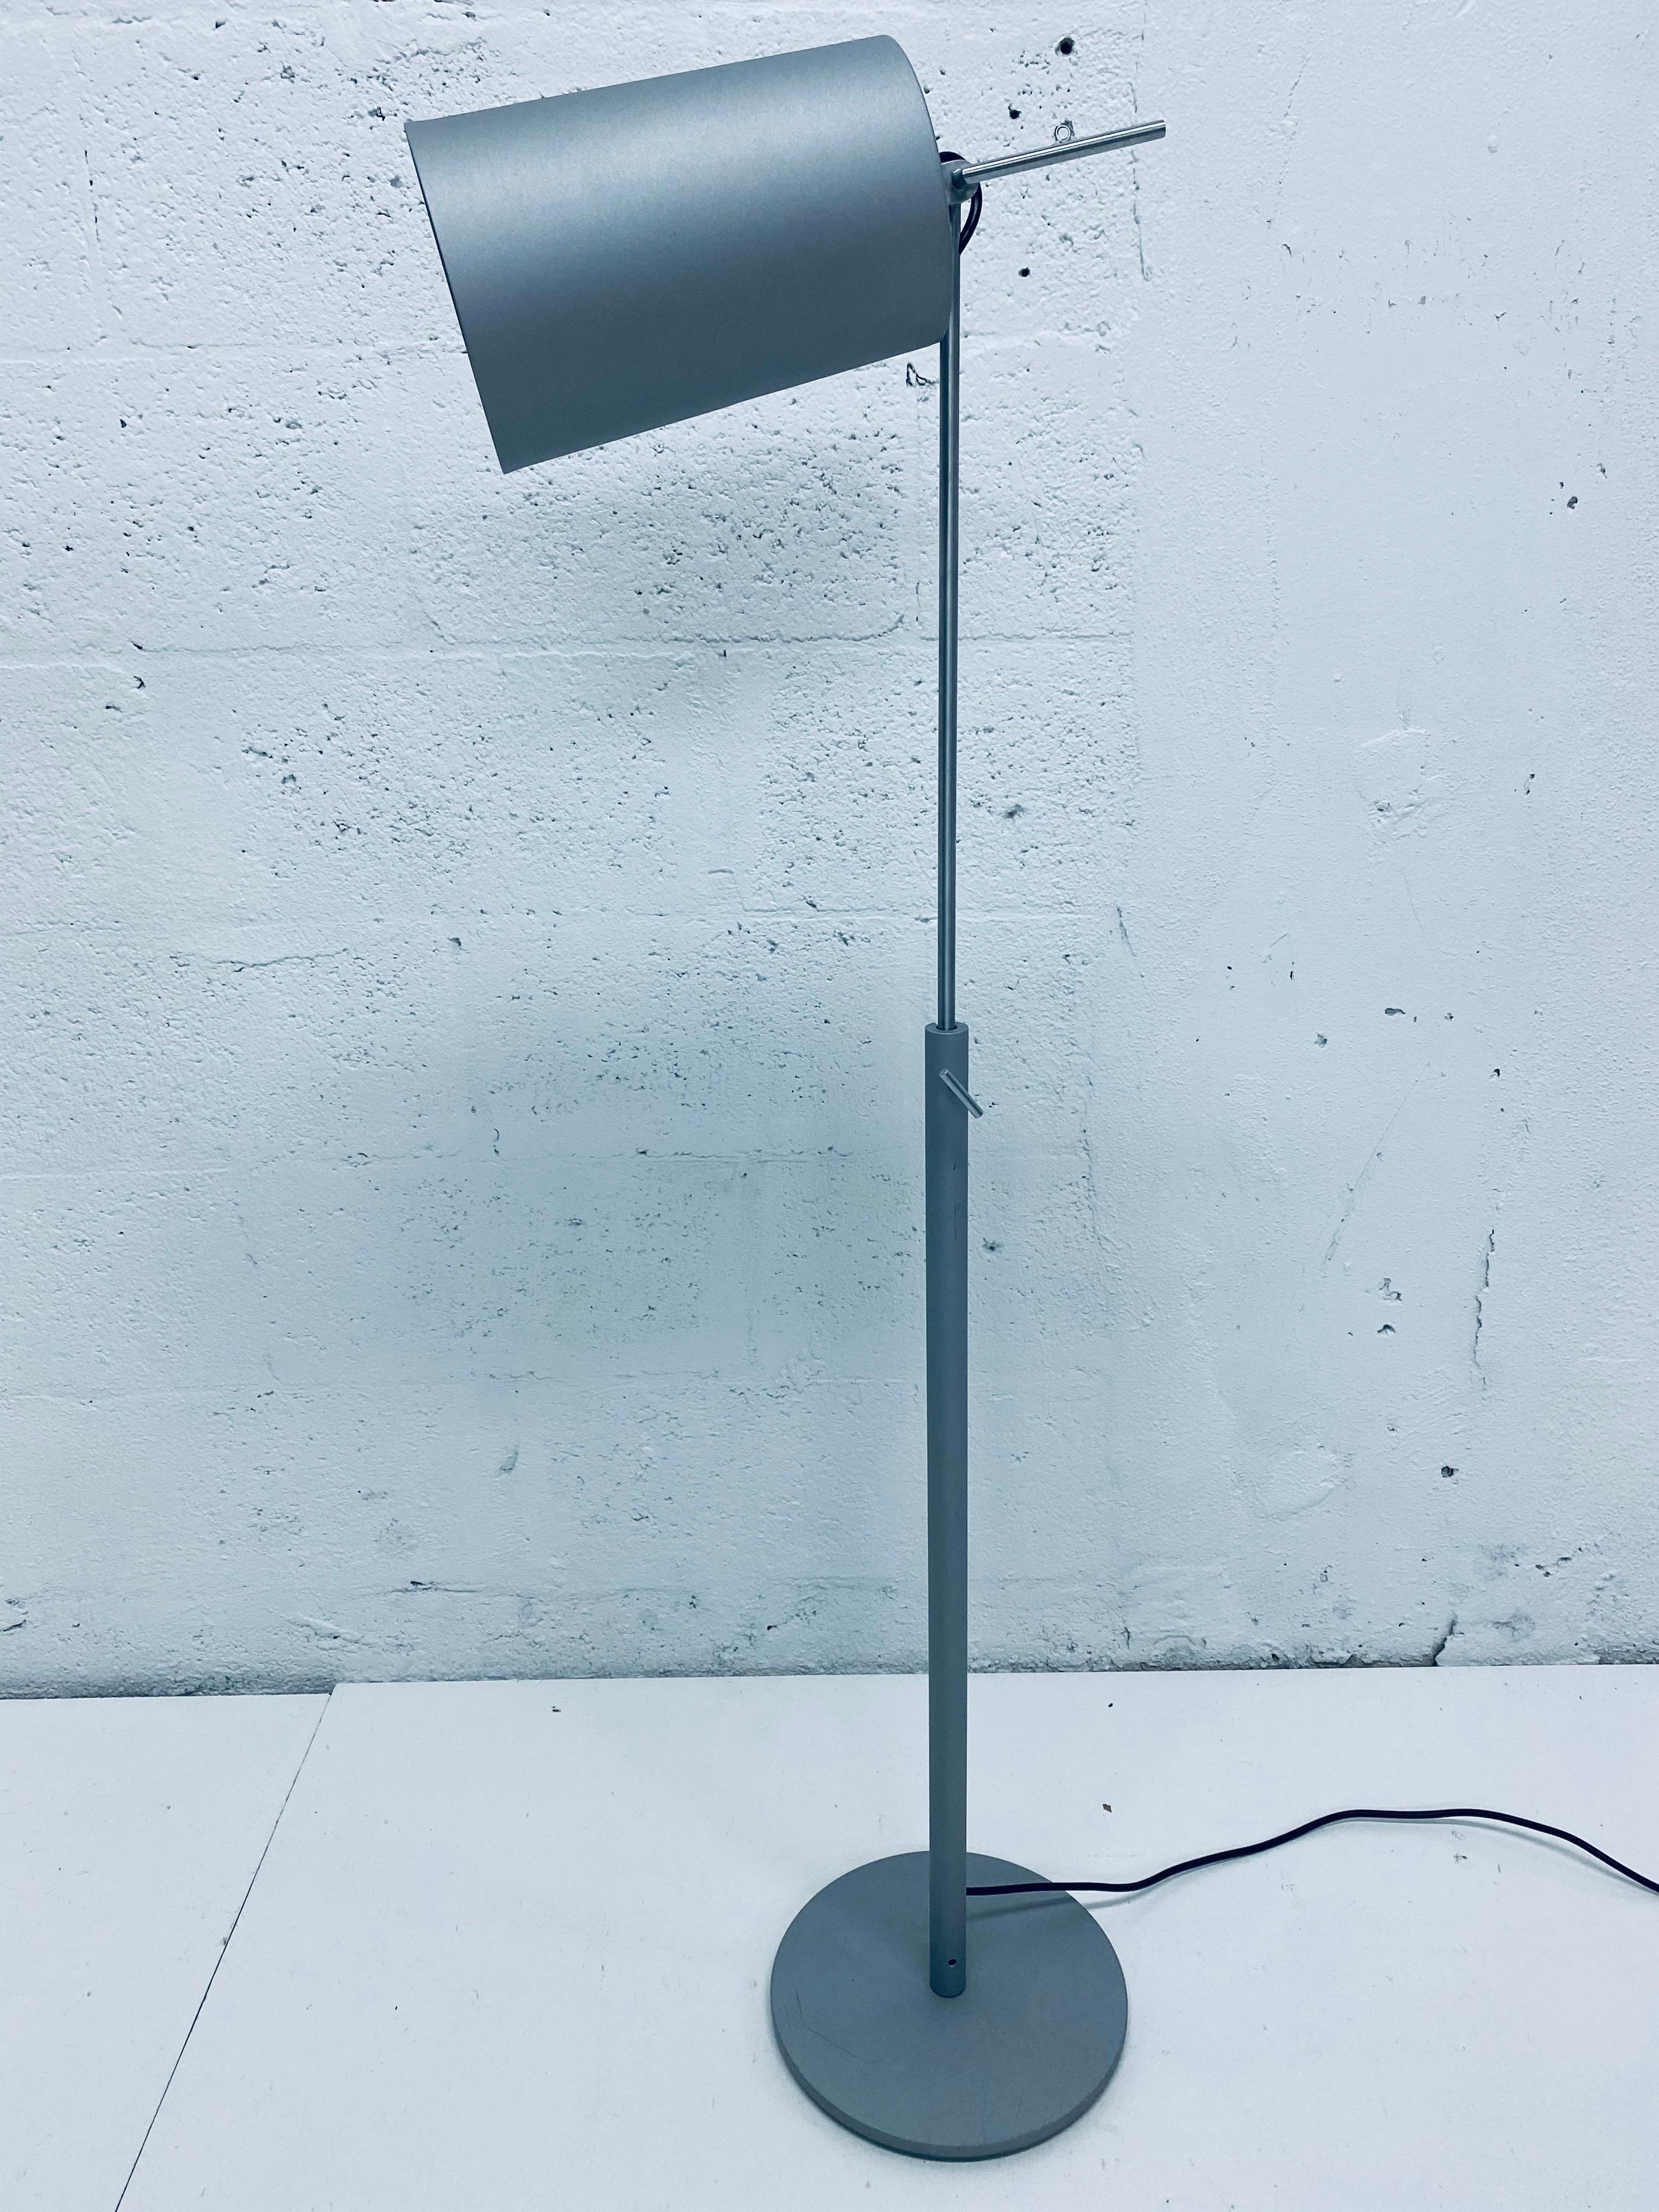 Rolf Heide designed floor lamp for Anta, Germany.

The Tuba floor lamp has been designed in a chic industrial style, but with a soft enough finish to make it ideal for any domestic space. This lamp can be adjusted to any height between 47